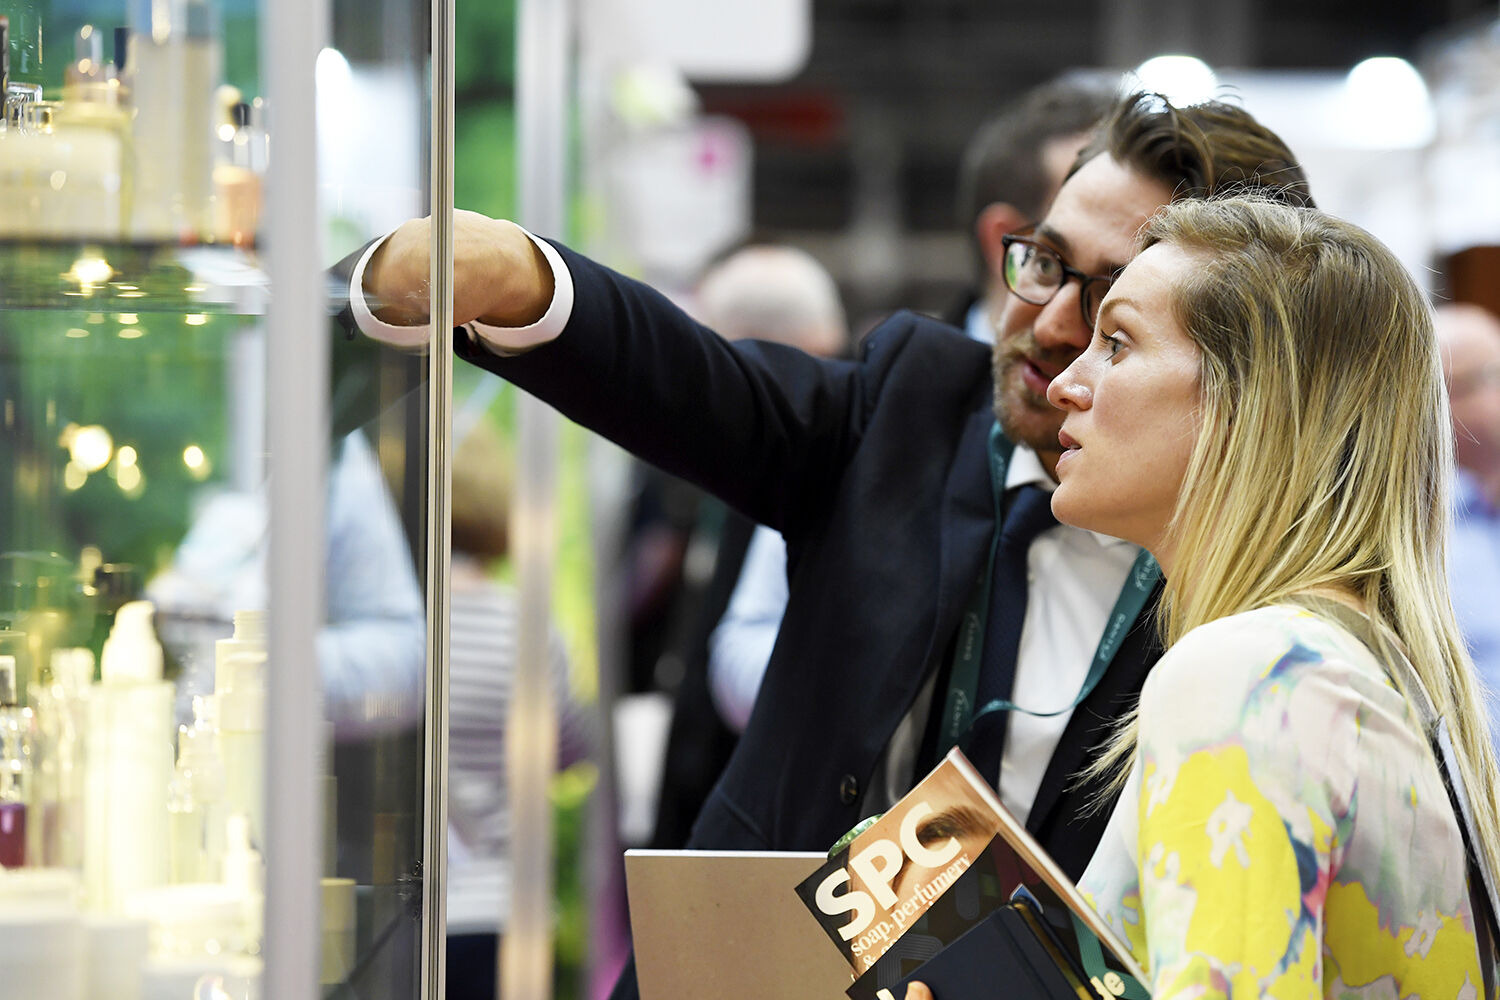 Packaging Innovations and Empack 2022 returns to the NEC